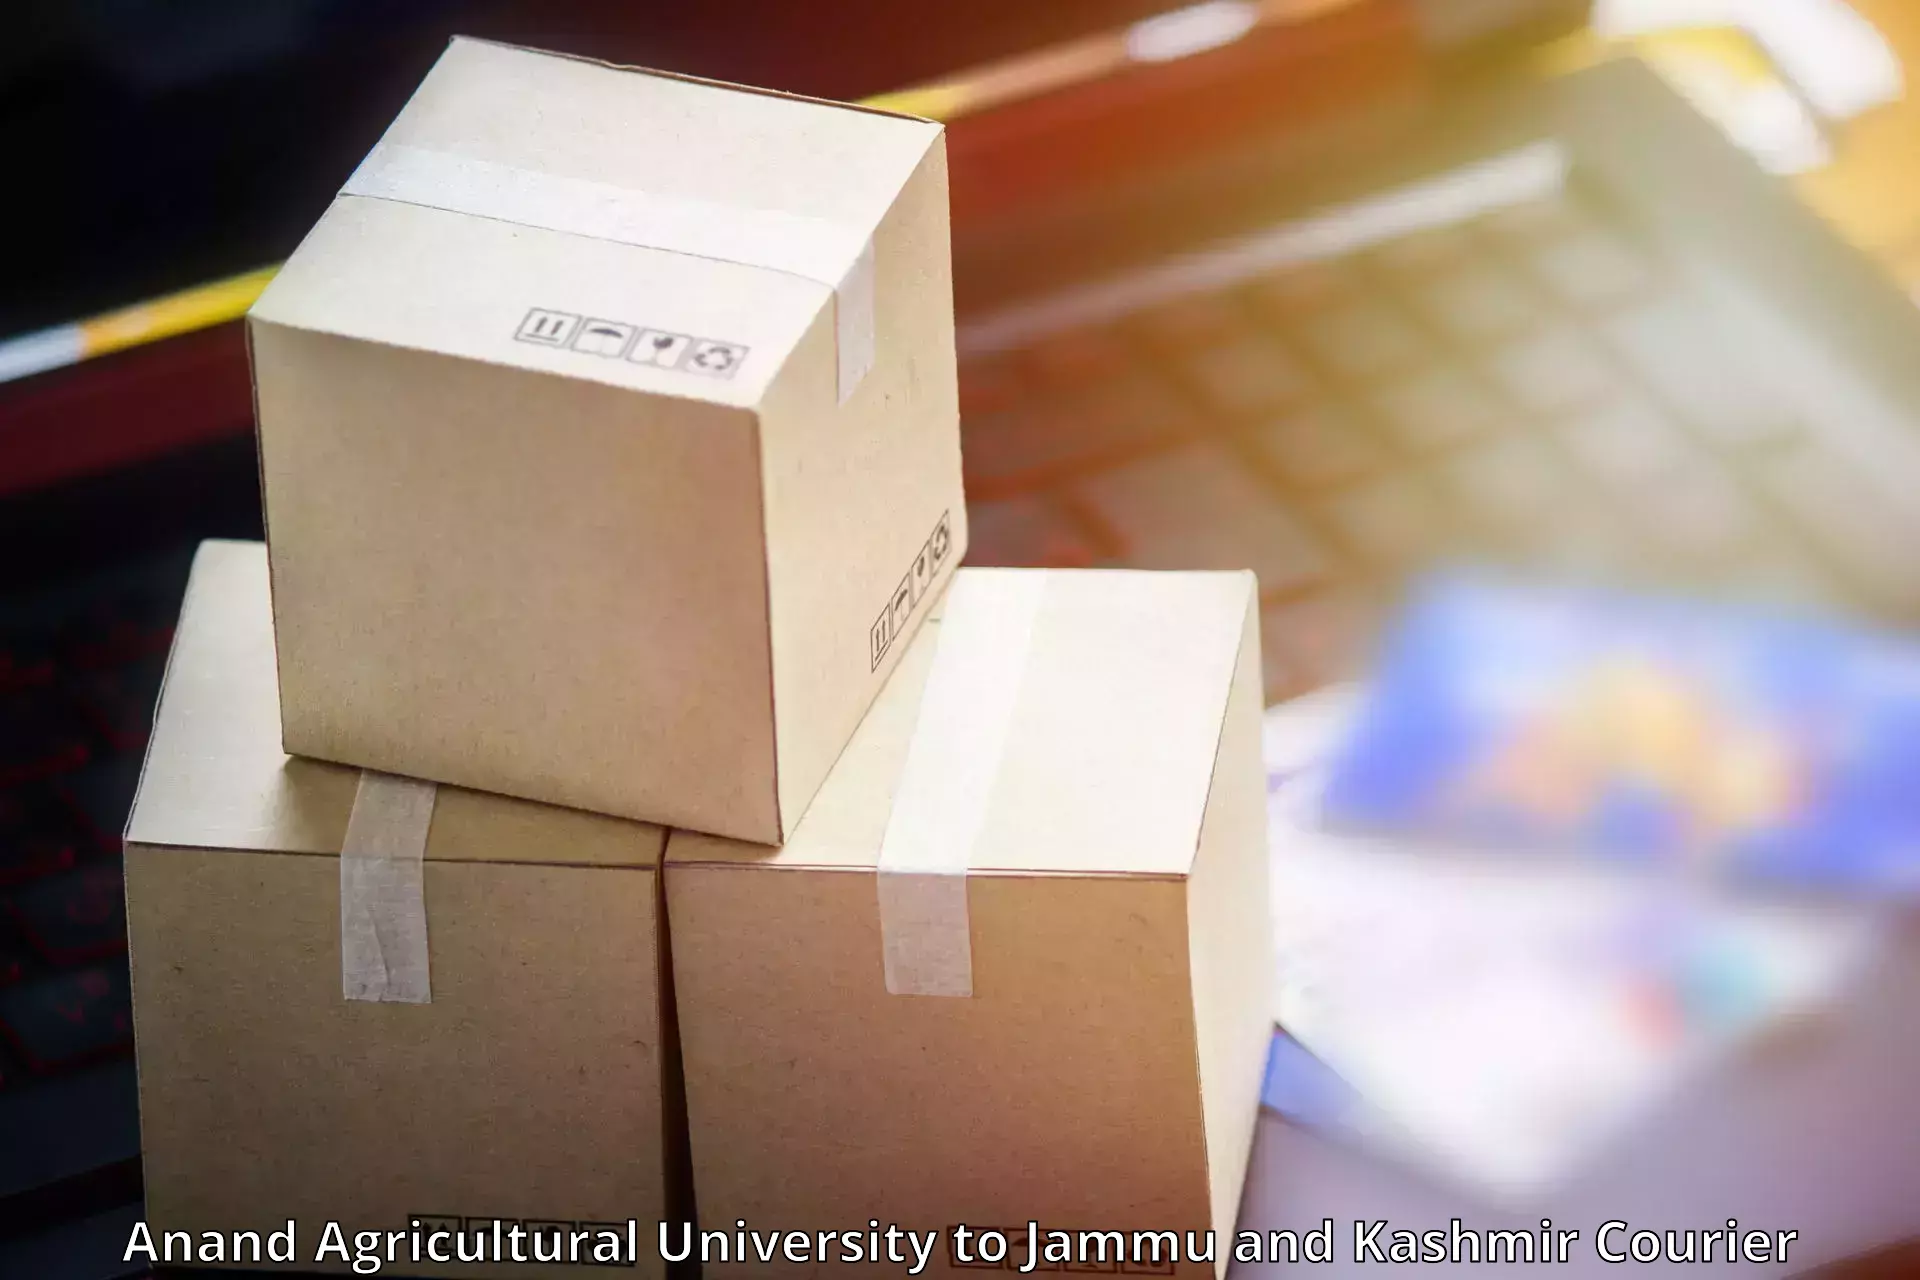 Express logistics in Anand Agricultural University to Baramulla